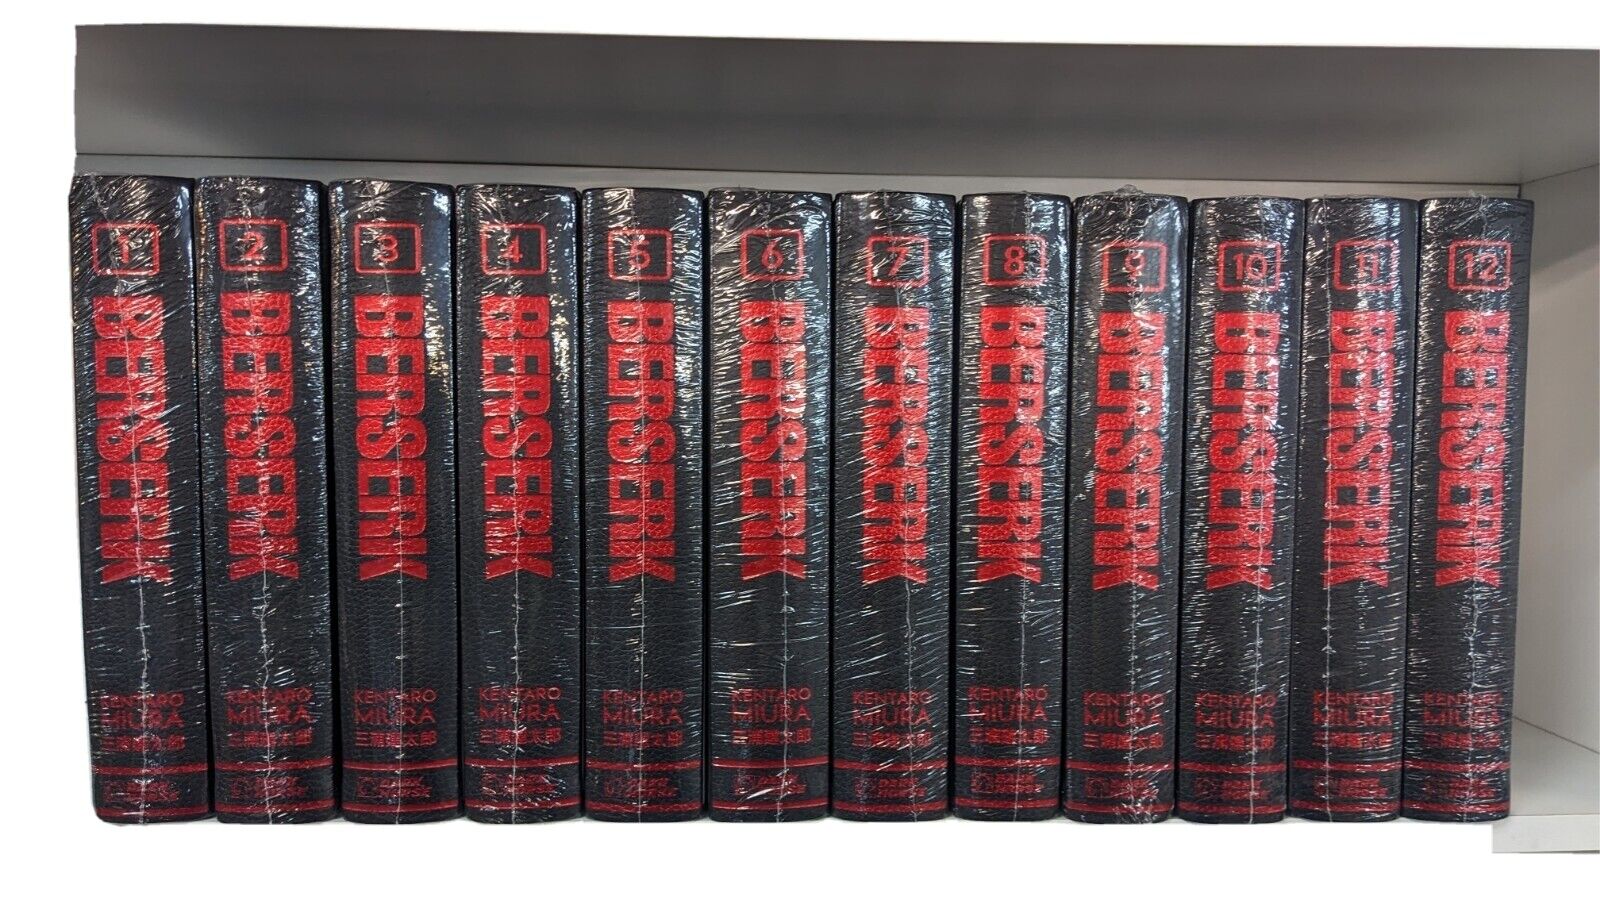 Berserk Deluxe Edition Hardcover Volume 1-14 New Sealed - Made to